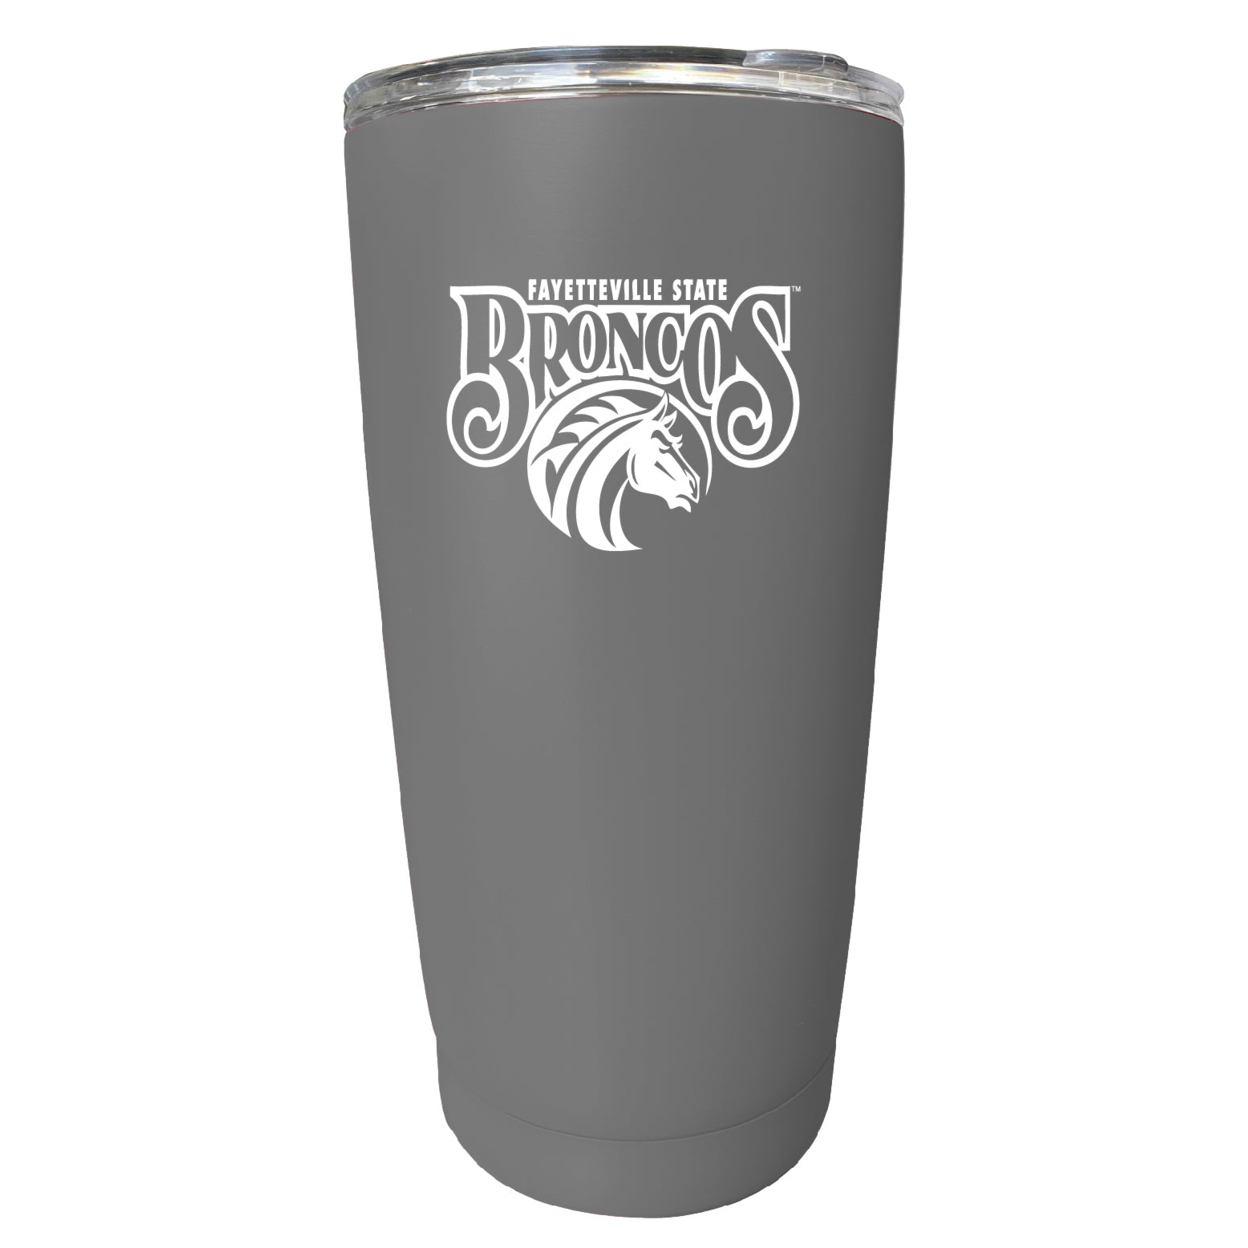 Fayetteville State University 16 Oz Stainless Steel Insulated Tumbler - Gray